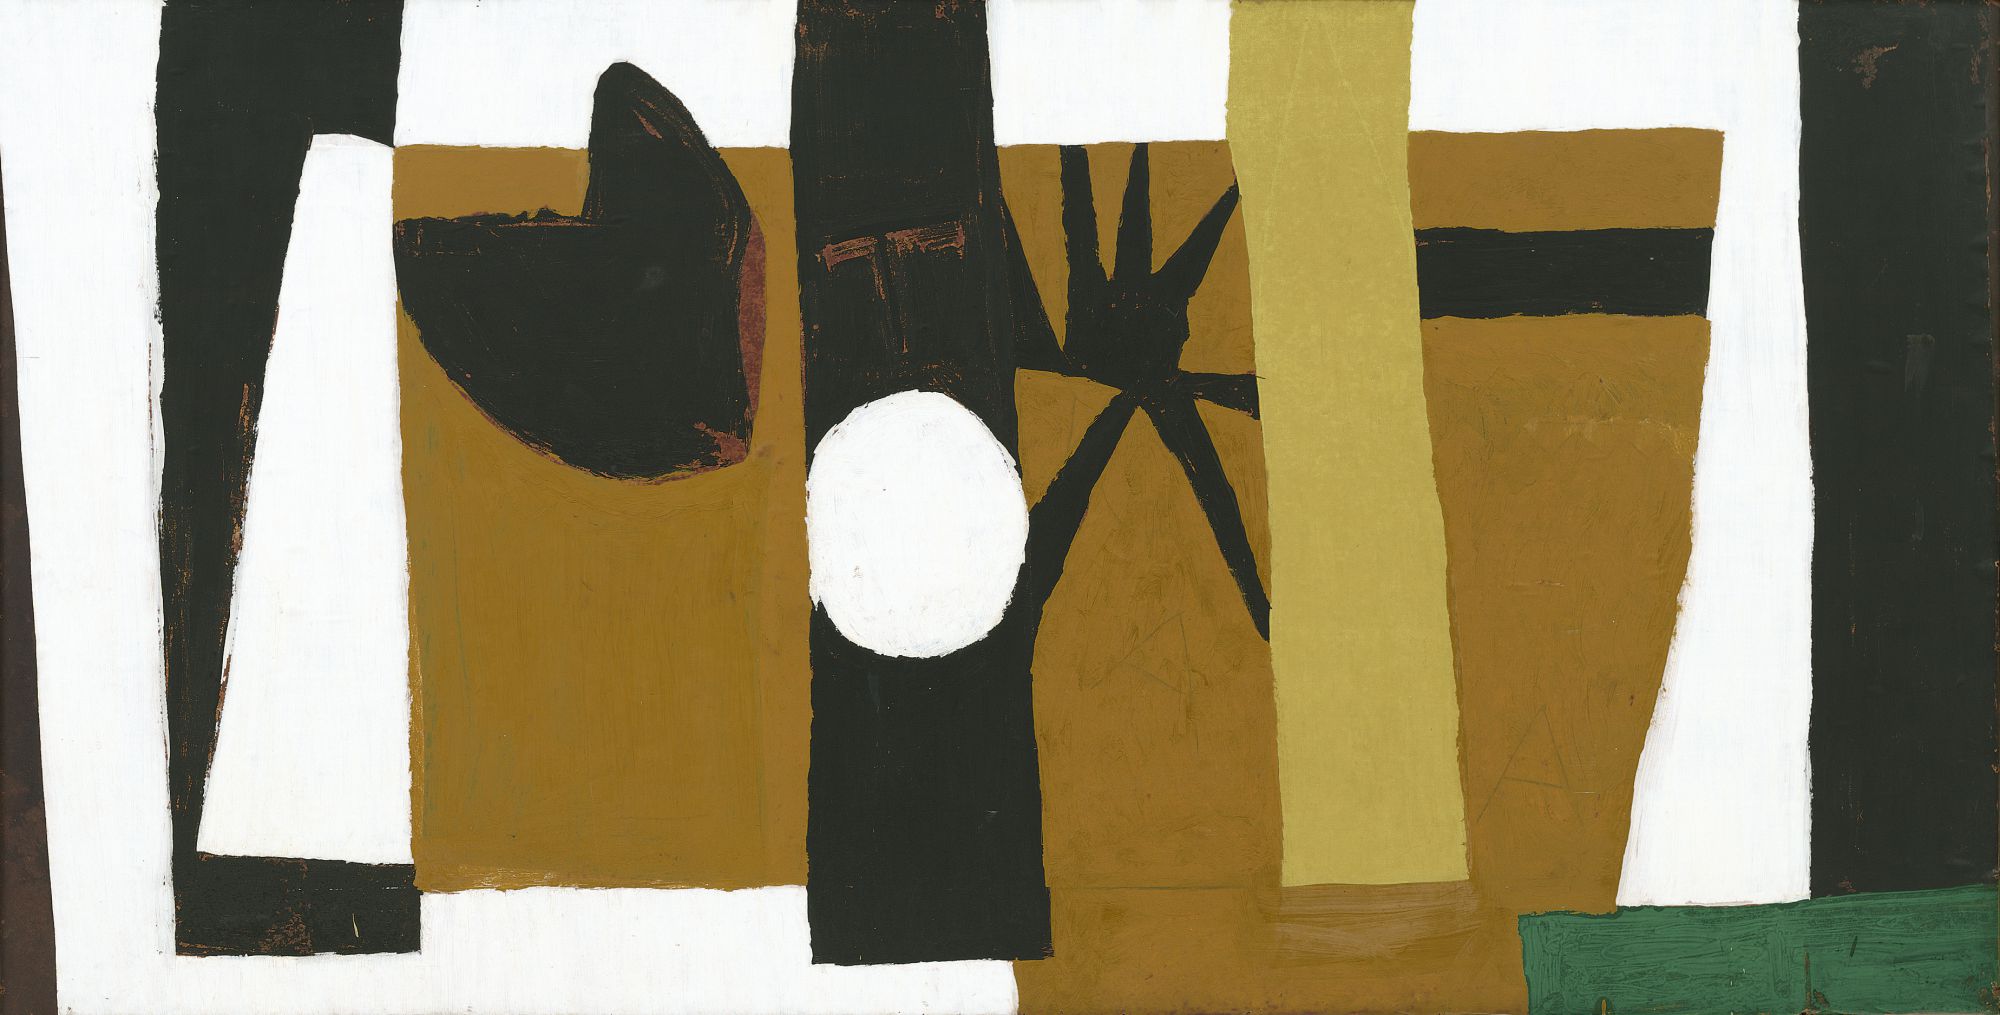 The Voyage, 1948–1949. Oil, tempera, and charcoal on paper mounted on Masonite, 48 x 94 inches (121.9 x 238.8 cm)